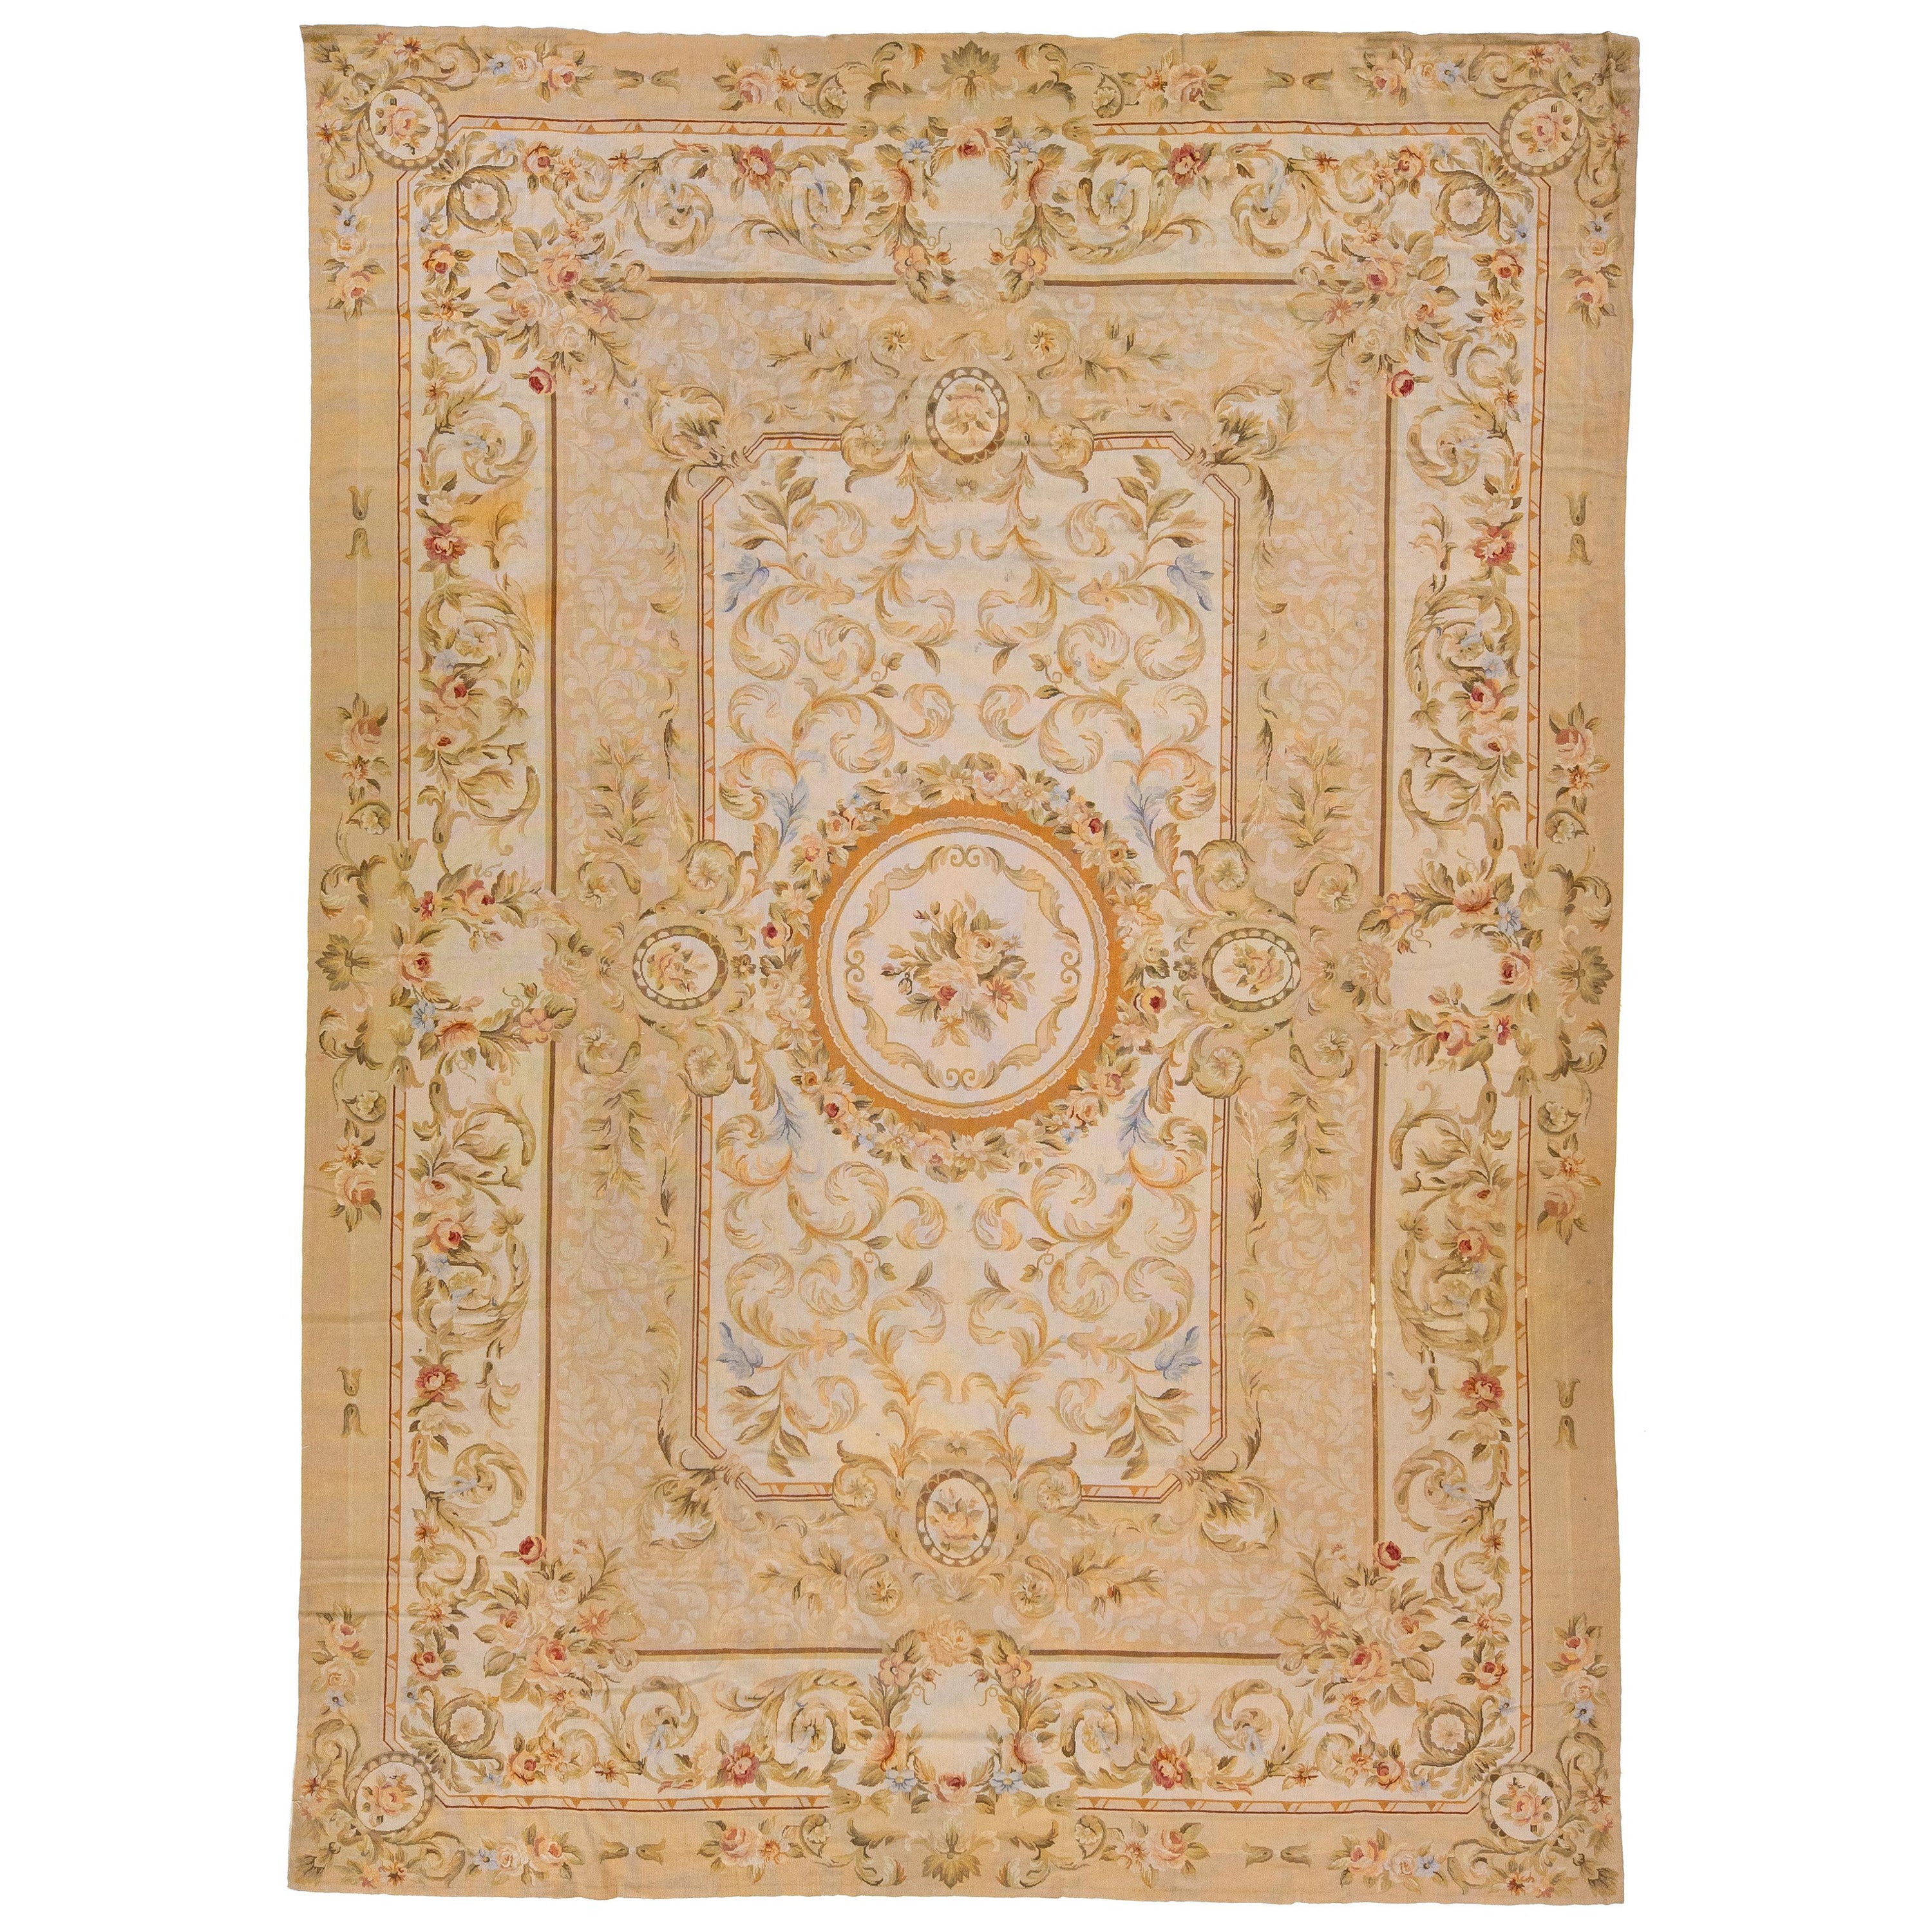 Vintage Portuguese Aubusson Needlepoint Wool Rug In Beige With Rosette Motif For Sale